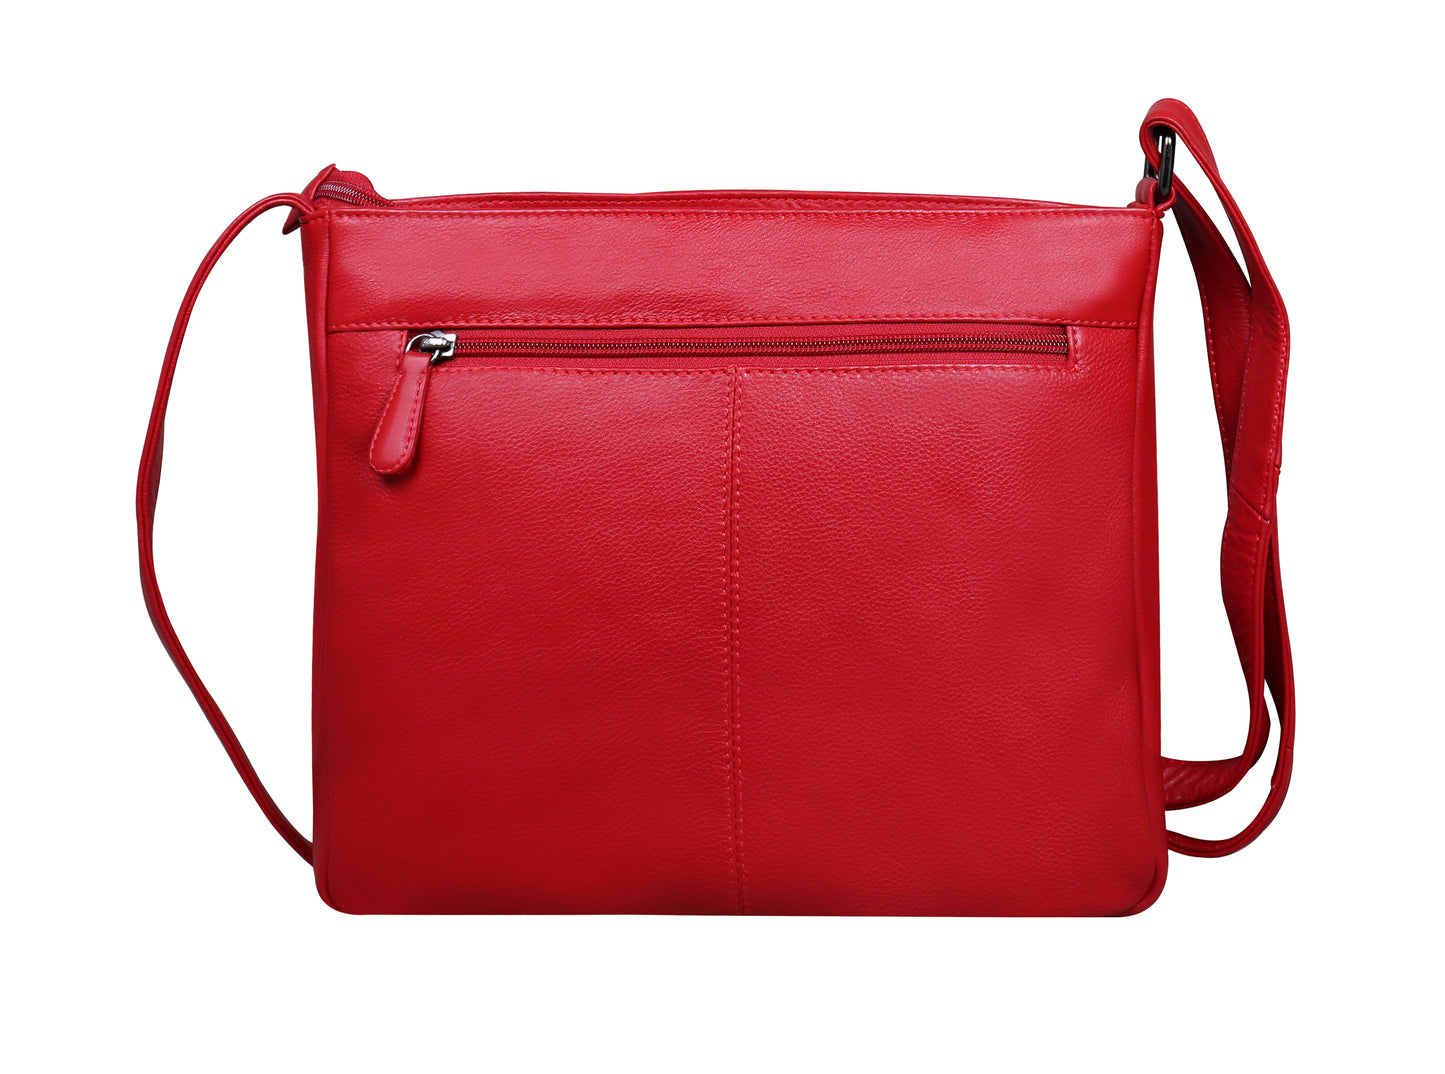 Copy of Calfnero Genuine Leather Women's Sling Bag (71686A-Red)